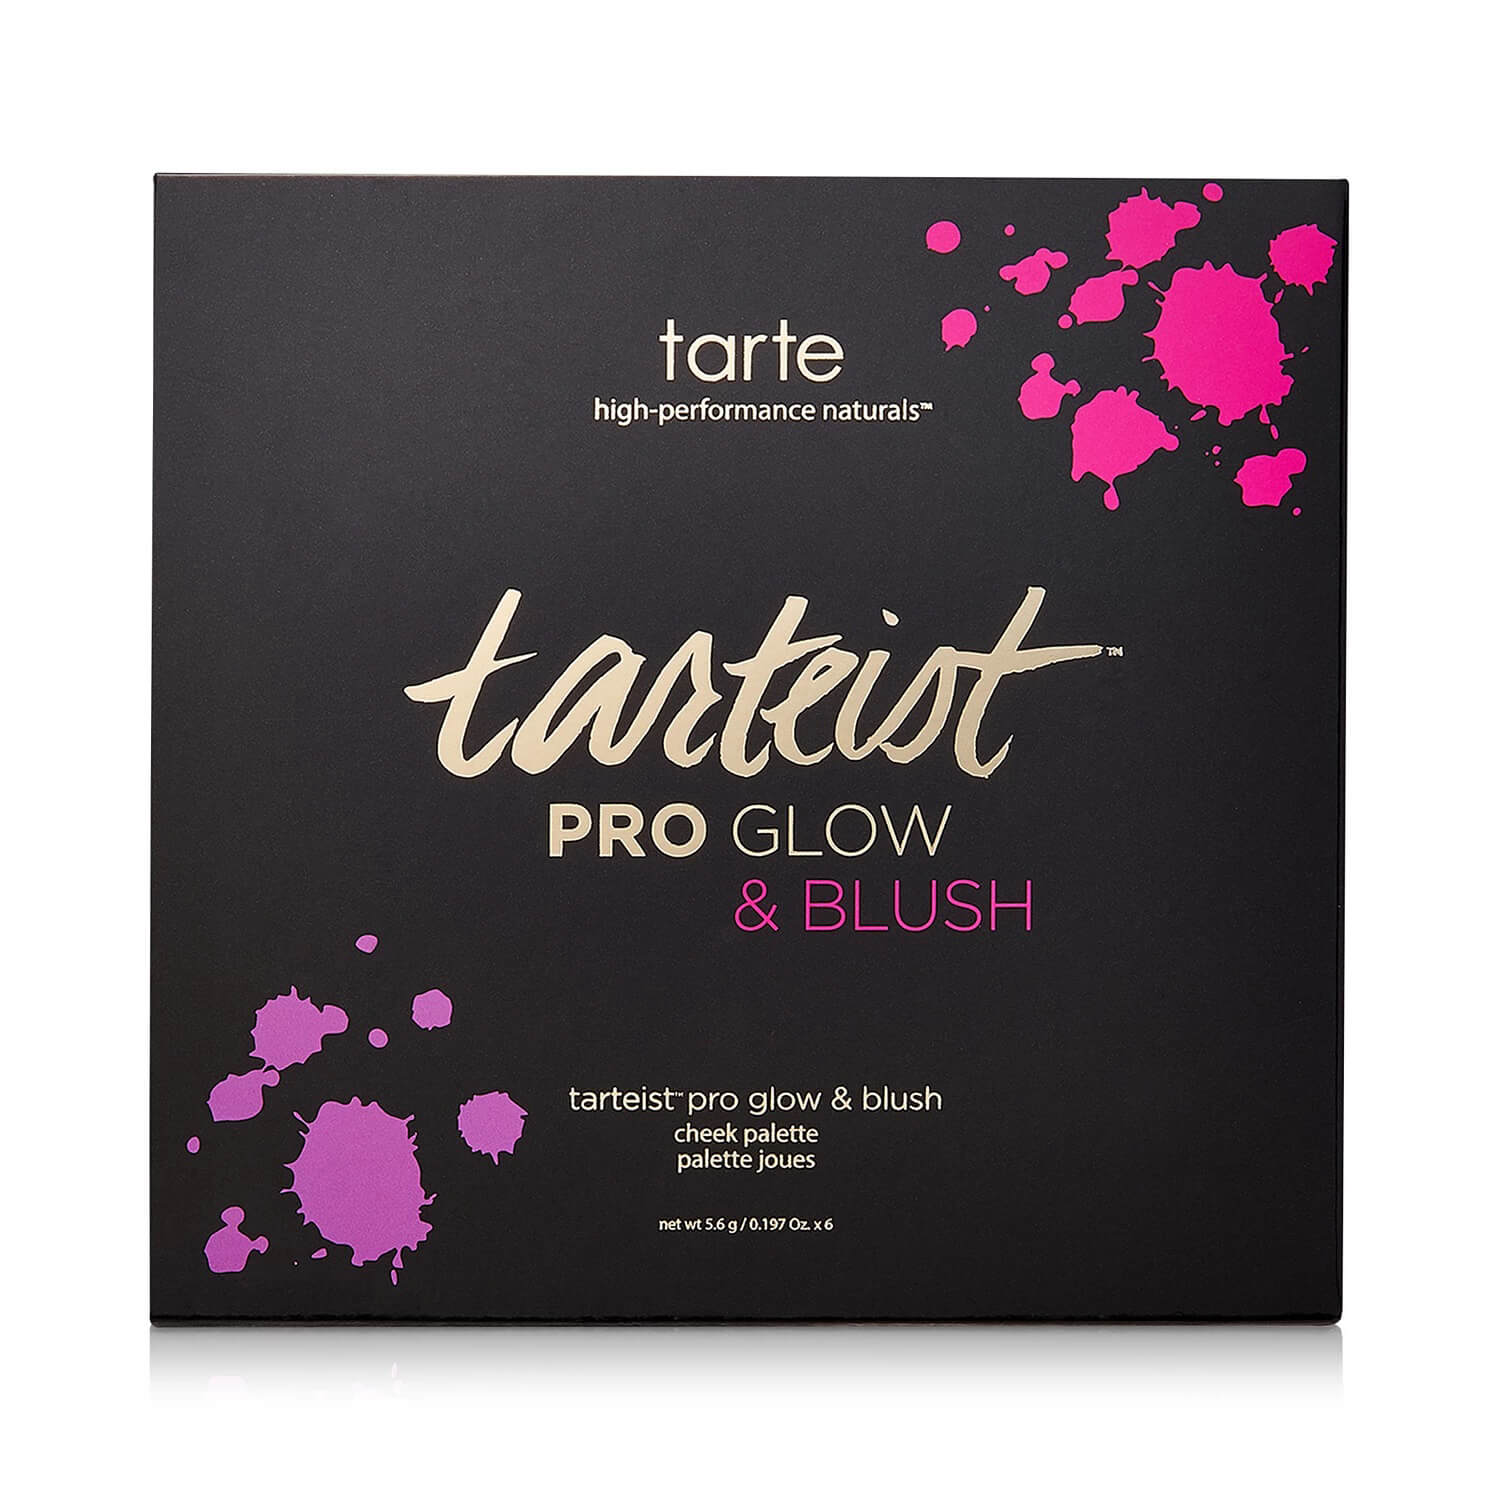 Tarte Pro Glow and Blush palette available at Heygirl.pk for delivery in Karachi, lahore, islamabad across Pakistan